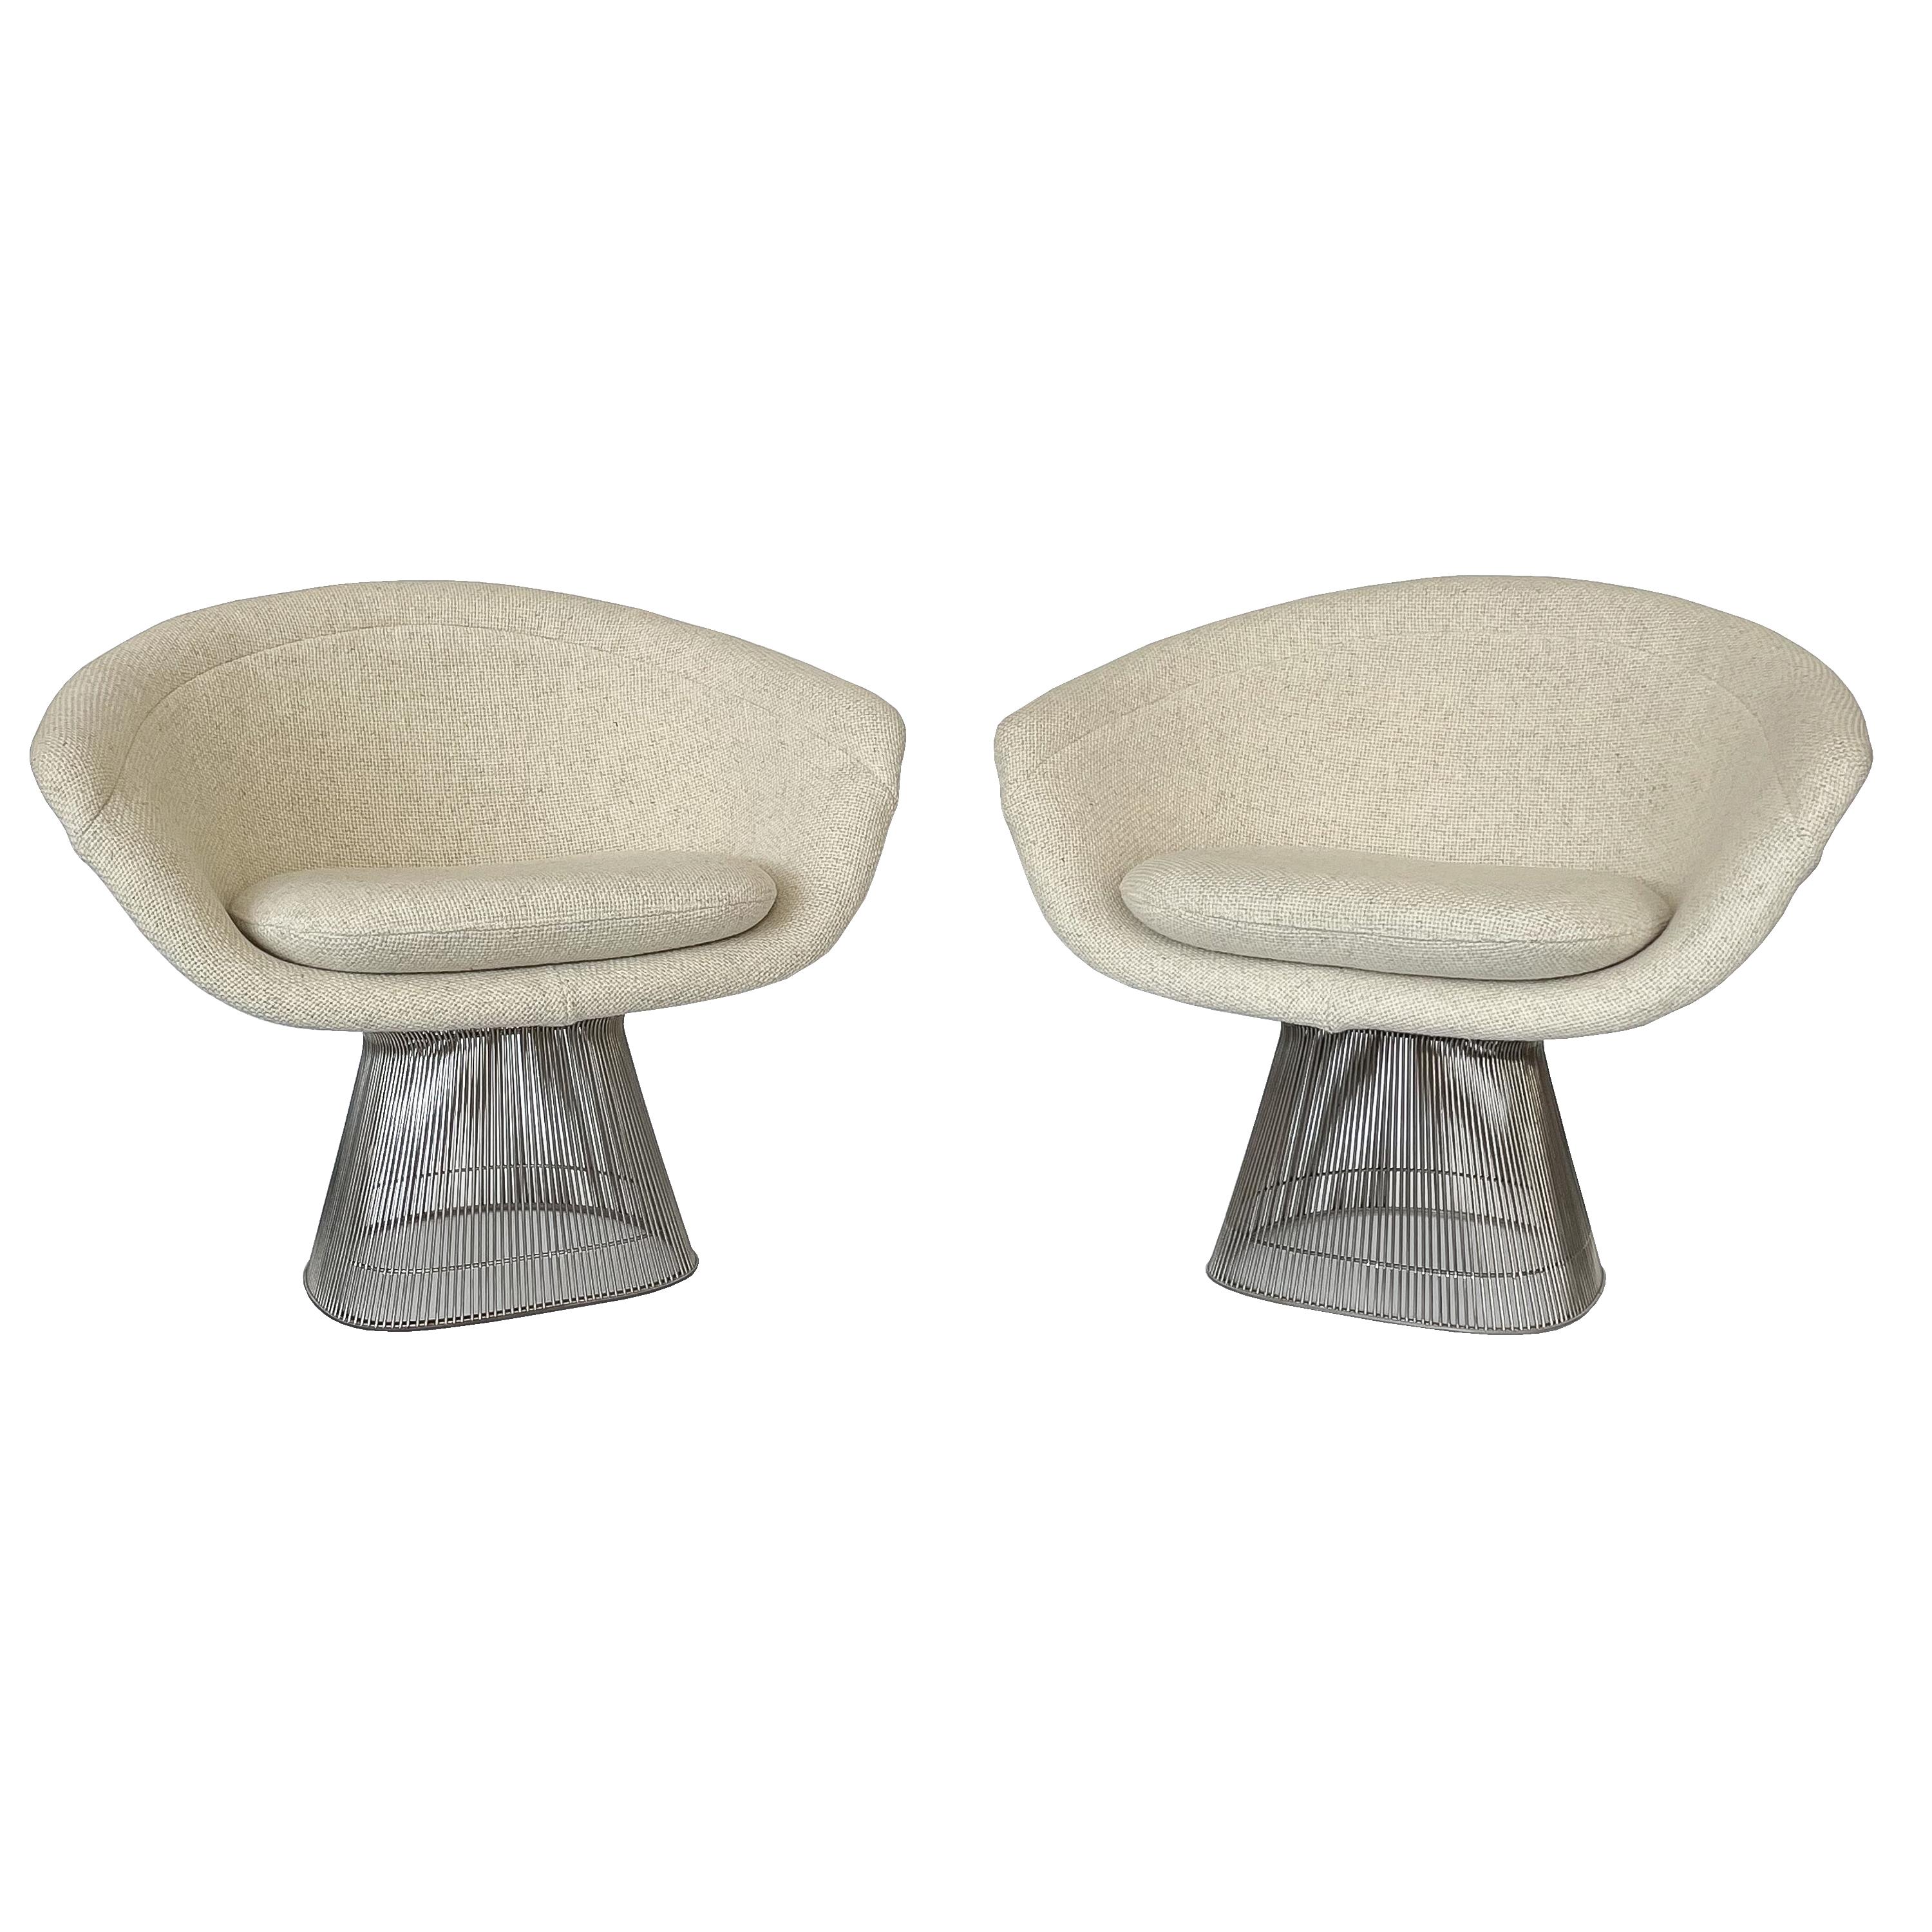 Pair of early Warren Platner wire lounge chairs for Knoll, circa 1970. Designed in 1966 and produced by Knoll, this pair is an early example from around 1970. Nickel plated steel wire framework with original heathered light oatmeal woven fabric back